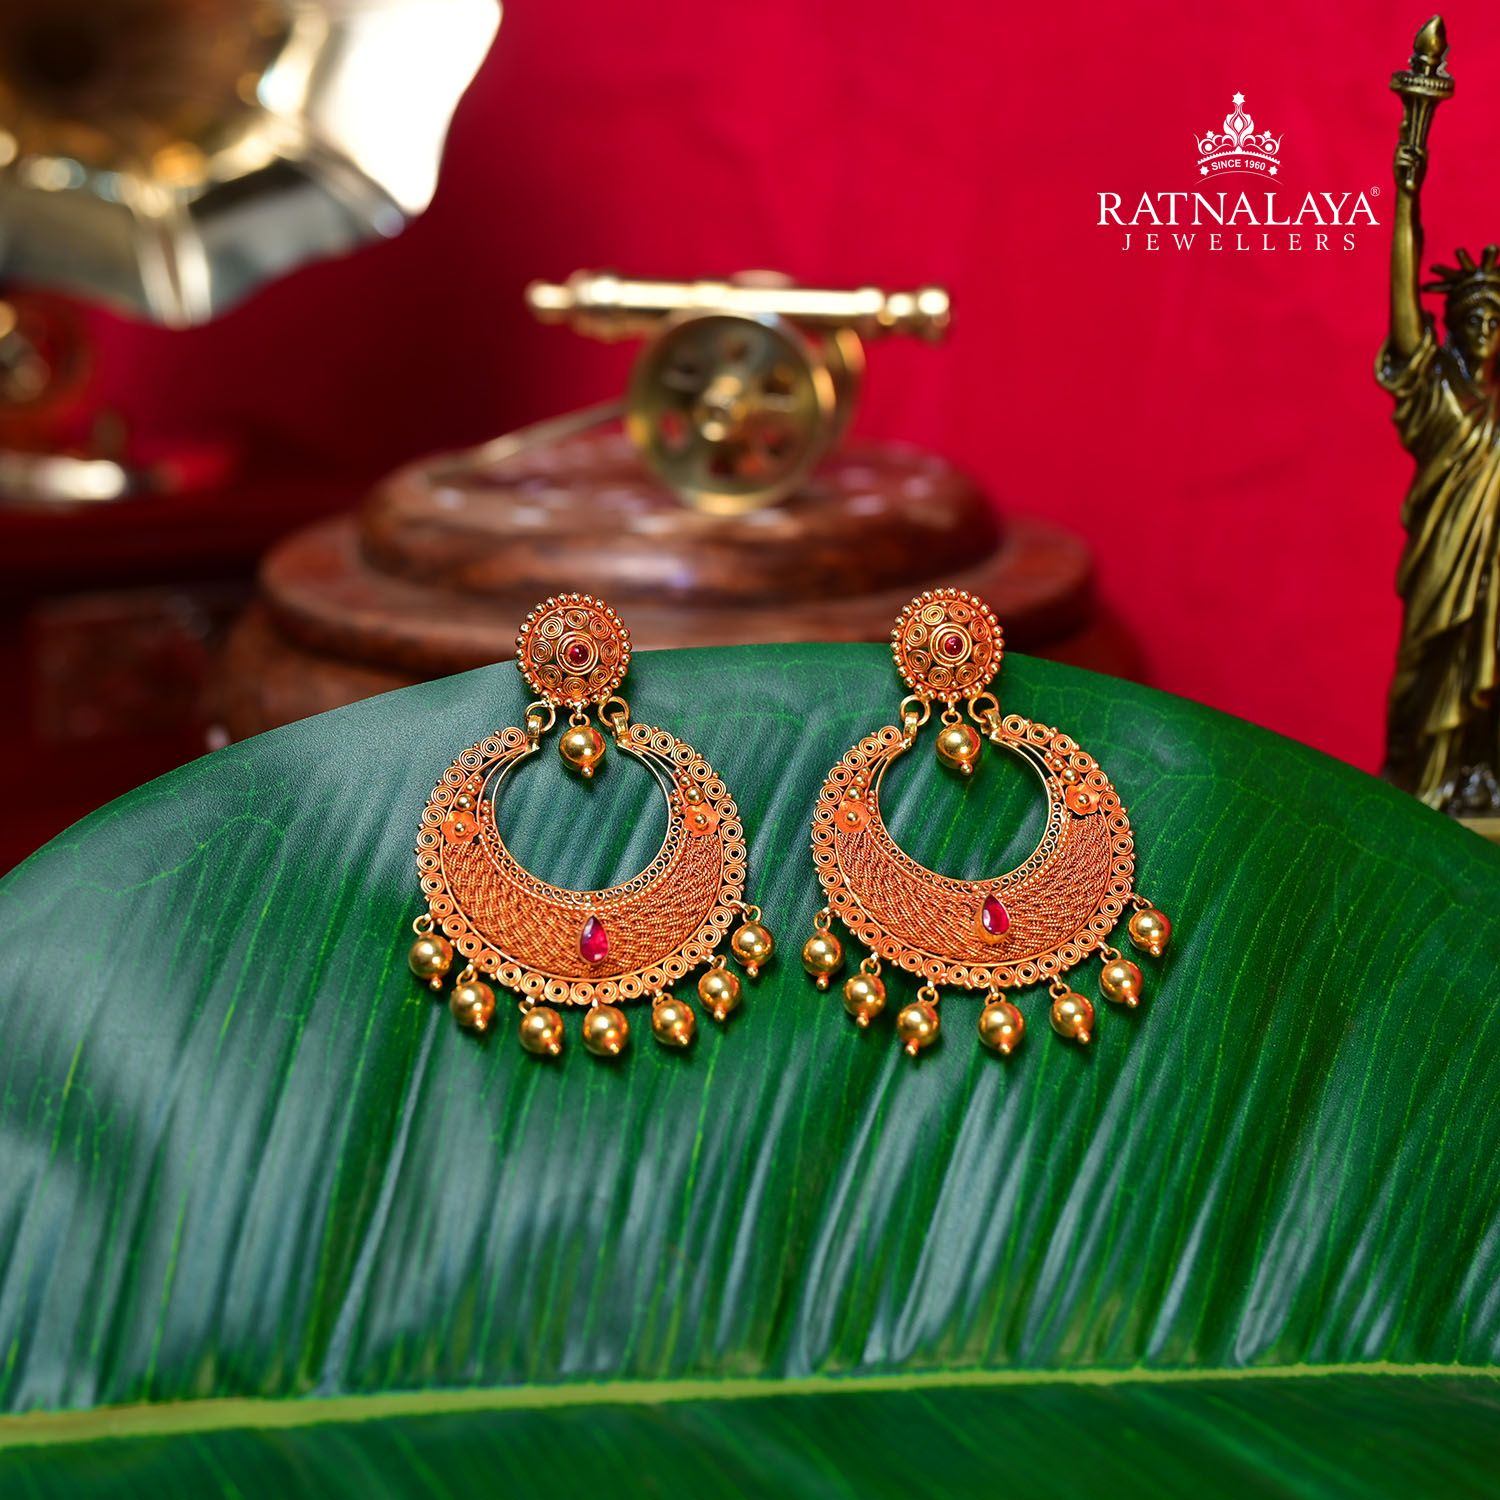 Intricate Filigree 22K Gold Antique Chand Bali Earrings – Andaaz Jewelers